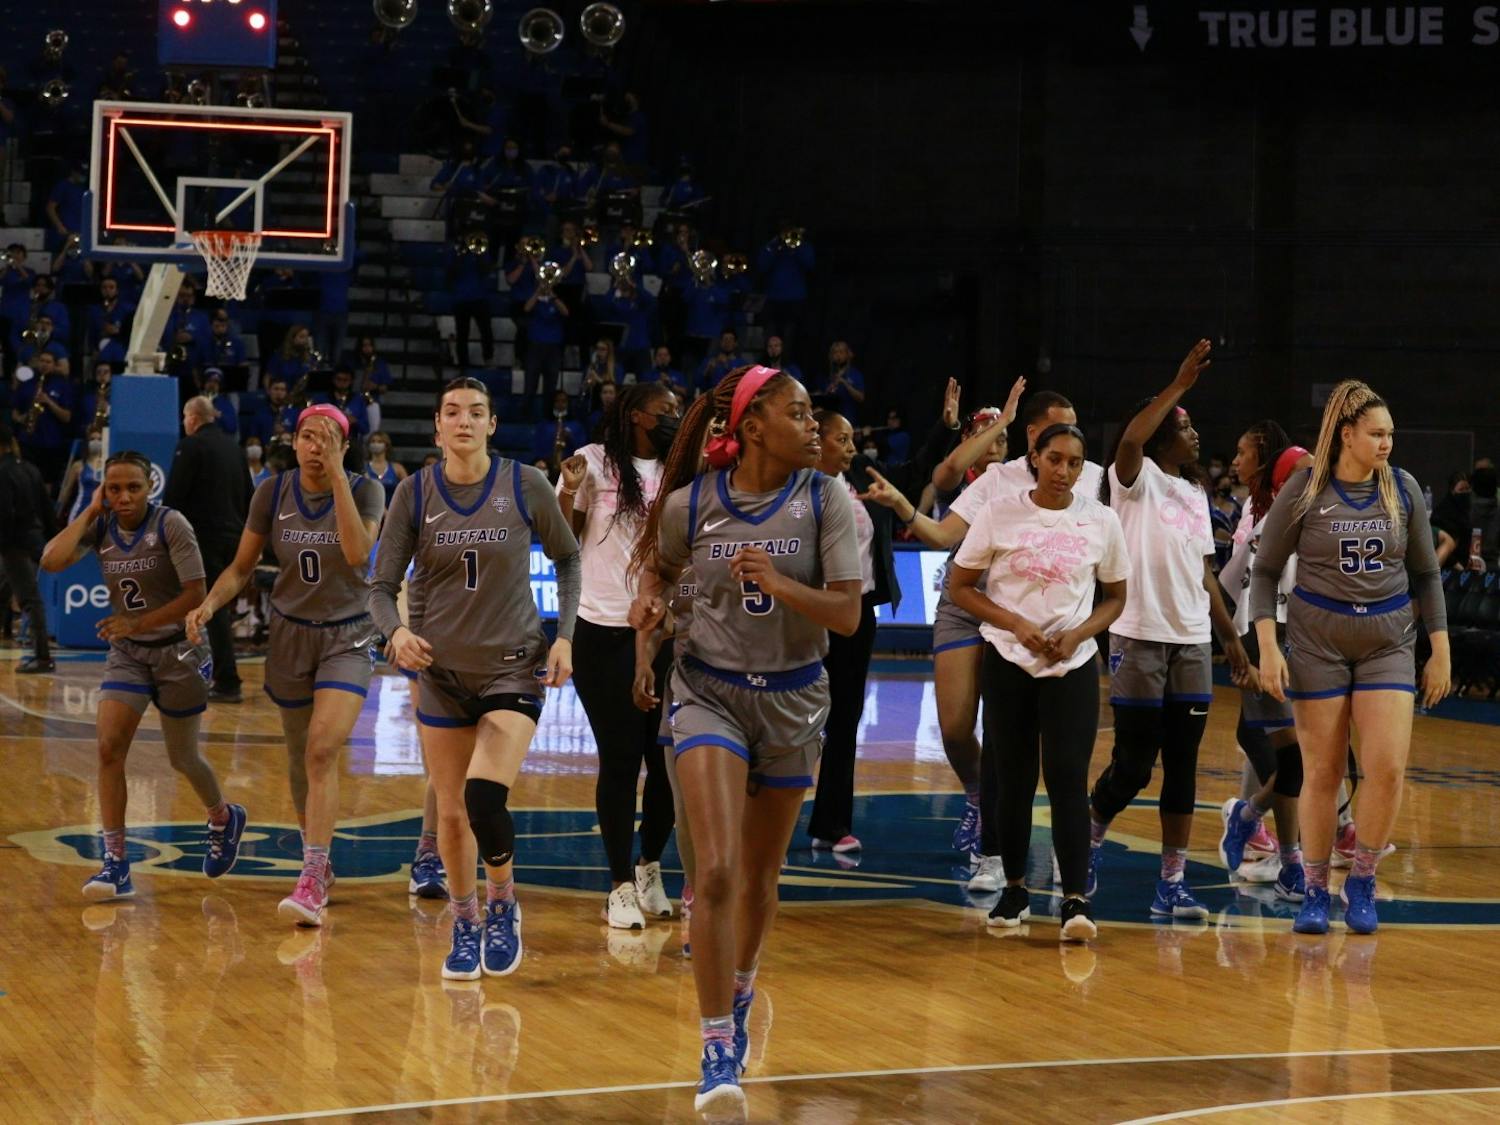 Junior guard Nia Jordan (5) and the rest of the UB women's basketball team runs off the court following a recent game.